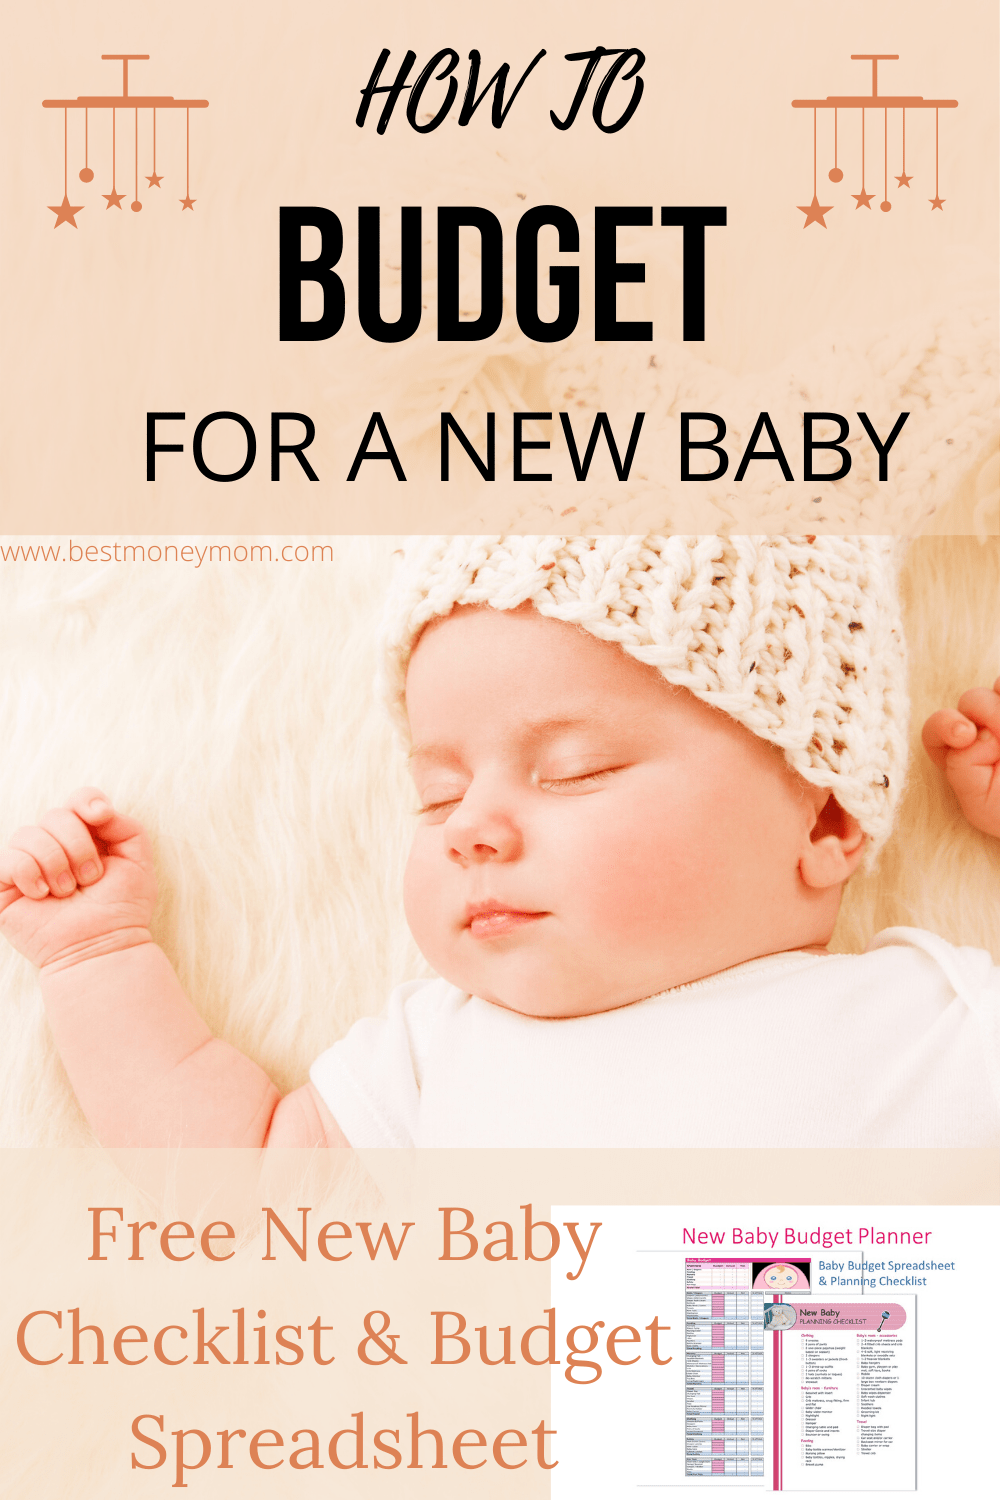 Budgeting with a new baby arrival